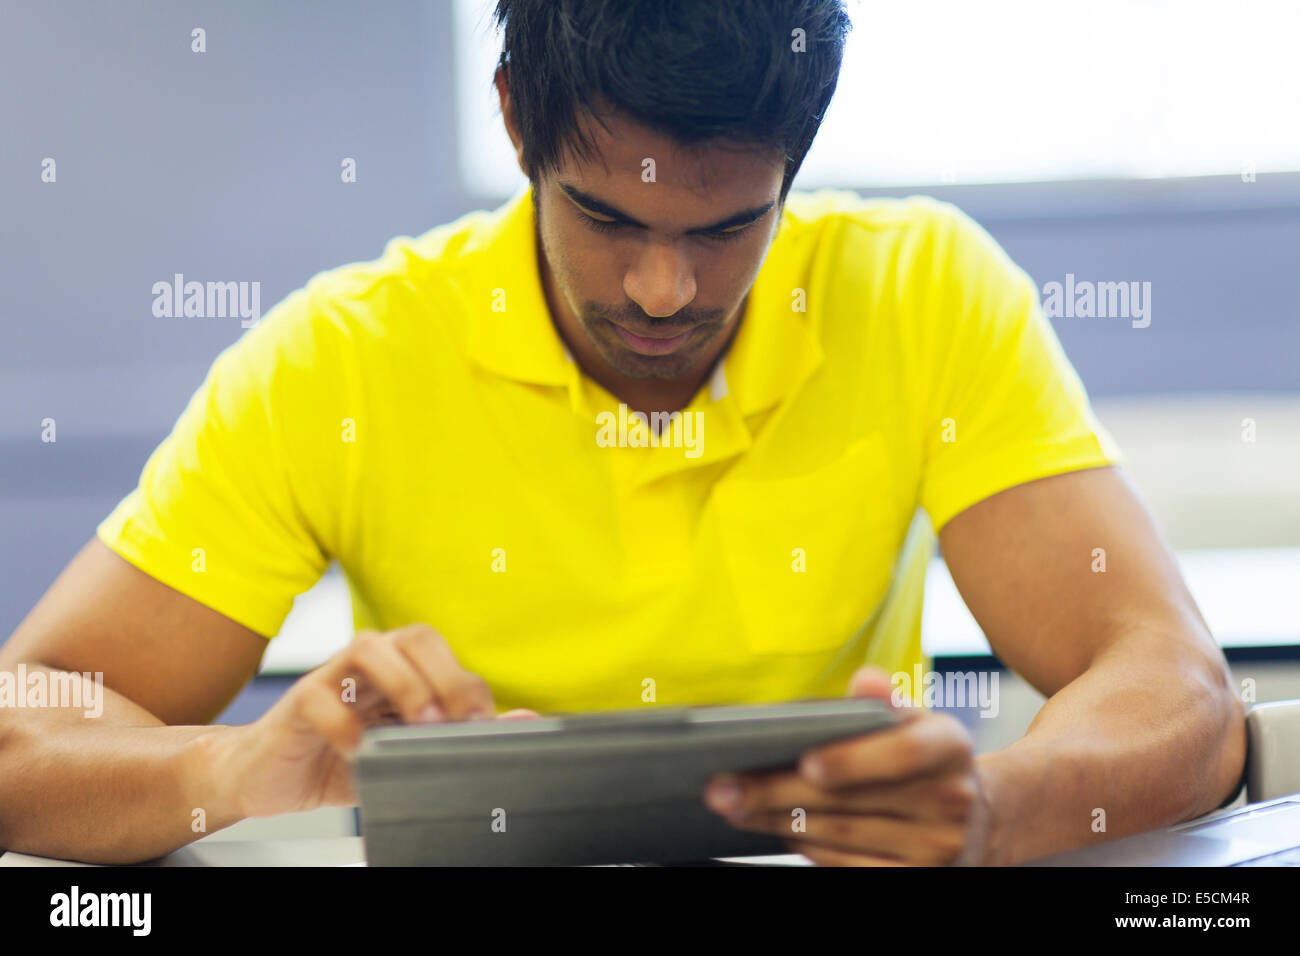 close up portrait of male Indian college student using tablet computer Stock Photo